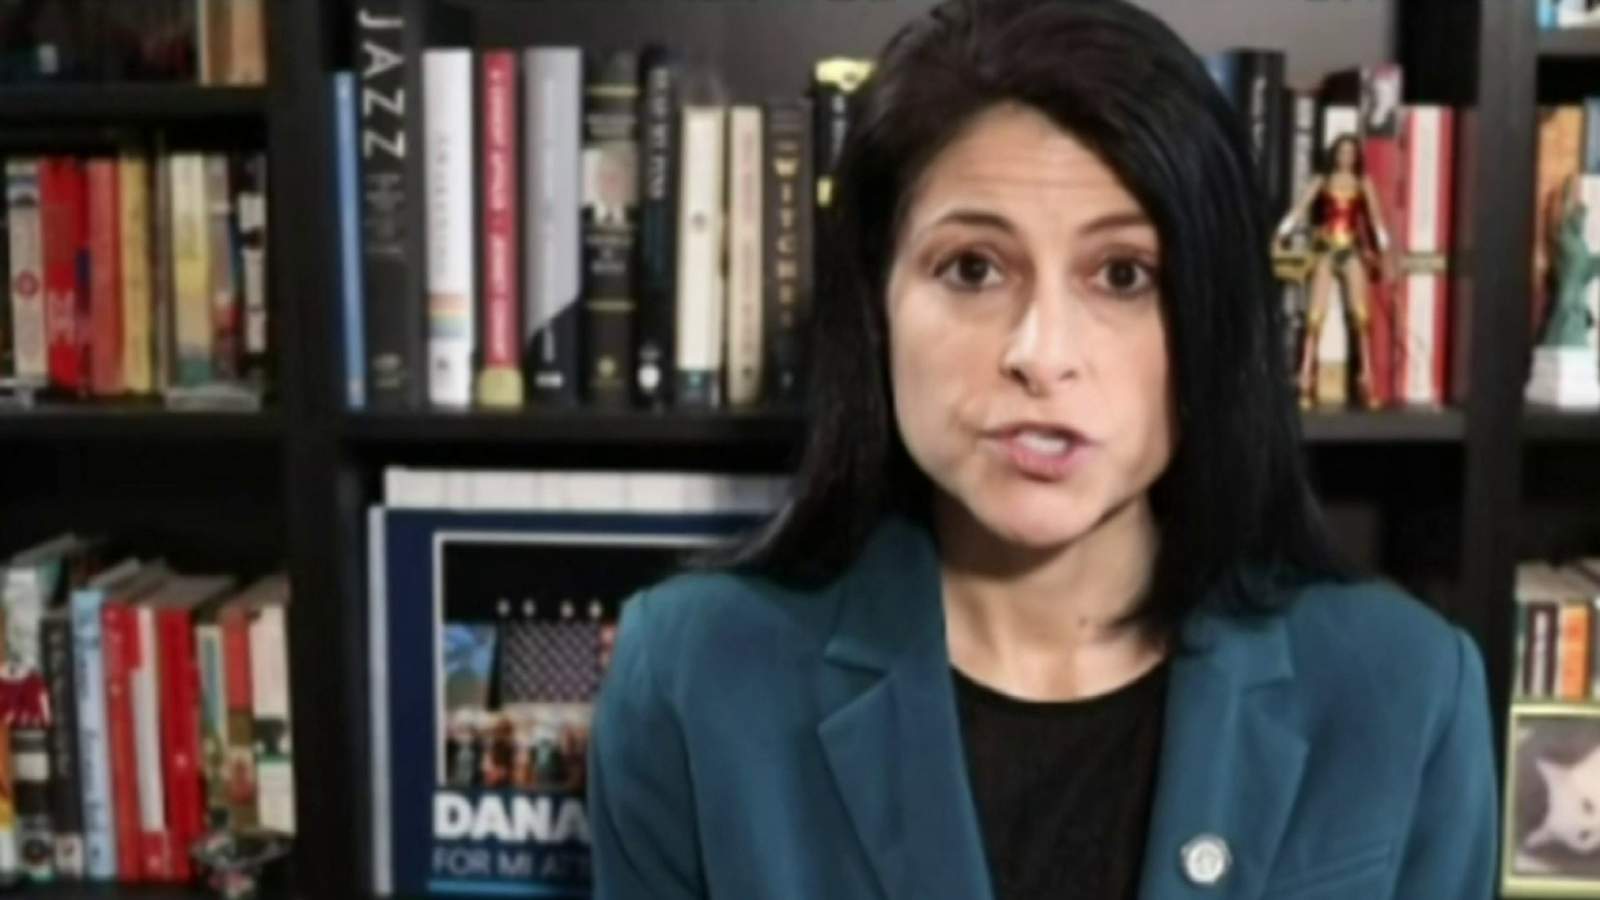 Michigan AG Dana Nessel weighs in on election, Enbridge lawsuits and more